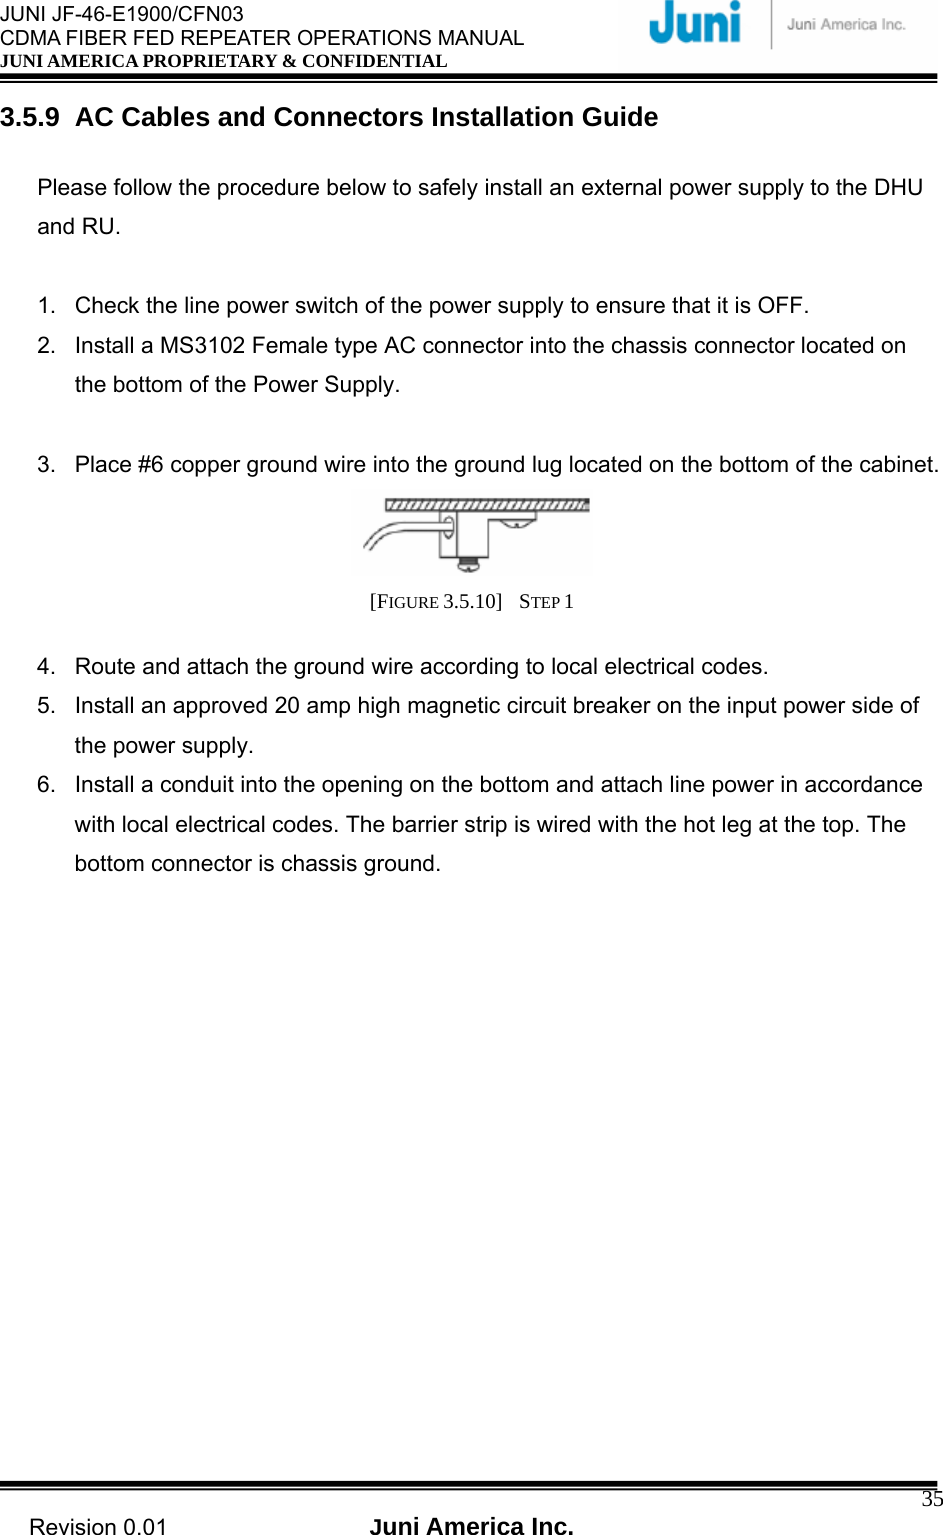  JUNI JF-46-E1900/CFN03 CDMA FIBER FED REPEATER OPERATIONS MANUAL JUNI AMERICA PROPRIETARY &amp; CONFIDENTIAL                                   Revision 0.01  Juni America Inc.  353.5.9  AC Cables and Connectors Installation Guide  Please follow the procedure below to safely install an external power supply to the DHU and RU.  1.  Check the line power switch of the power supply to ensure that it is OFF. 2.  Install a MS3102 Female type AC connector into the chassis connector located on the bottom of the Power Supply.  3.  Place #6 copper ground wire into the ground lug located on the bottom of the cabinet.  [FIGURE 3.5.10]  STEP 1   4.  Route and attach the ground wire according to local electrical codes. 5.  Install an approved 20 amp high magnetic circuit breaker on the input power side of the power supply. 6.  Install a conduit into the opening on the bottom and attach line power in accordance with local electrical codes. The barrier strip is wired with the hot leg at the top. The bottom connector is chassis ground.  